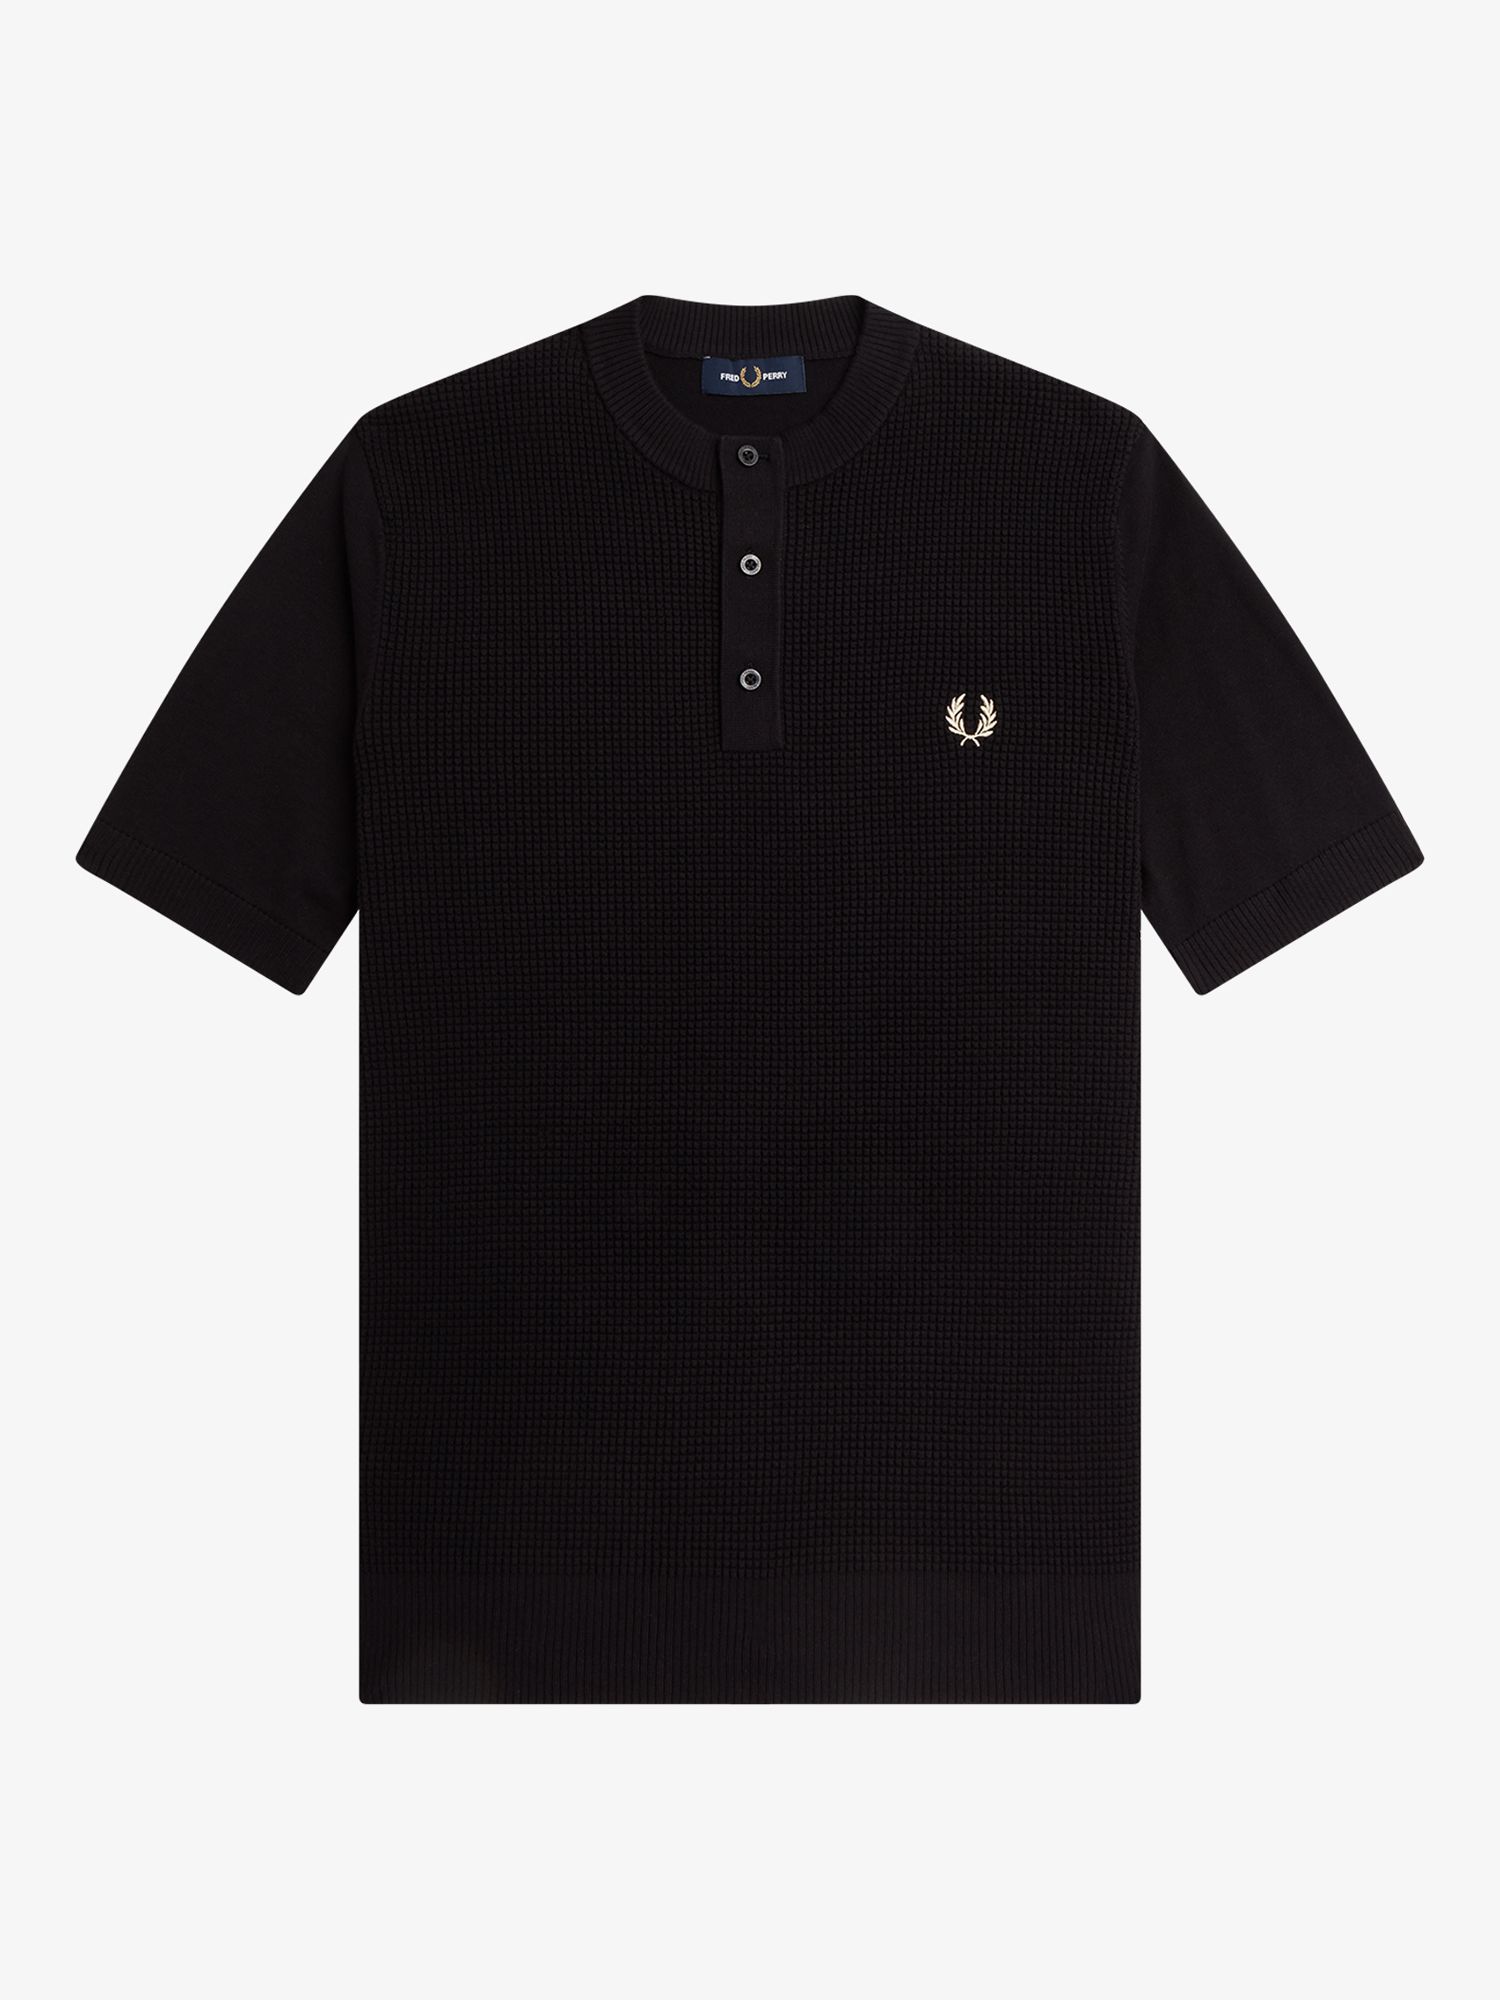 Fred Perry Waffled Textured Knit Henley Top, Black at John Lewis & Partners